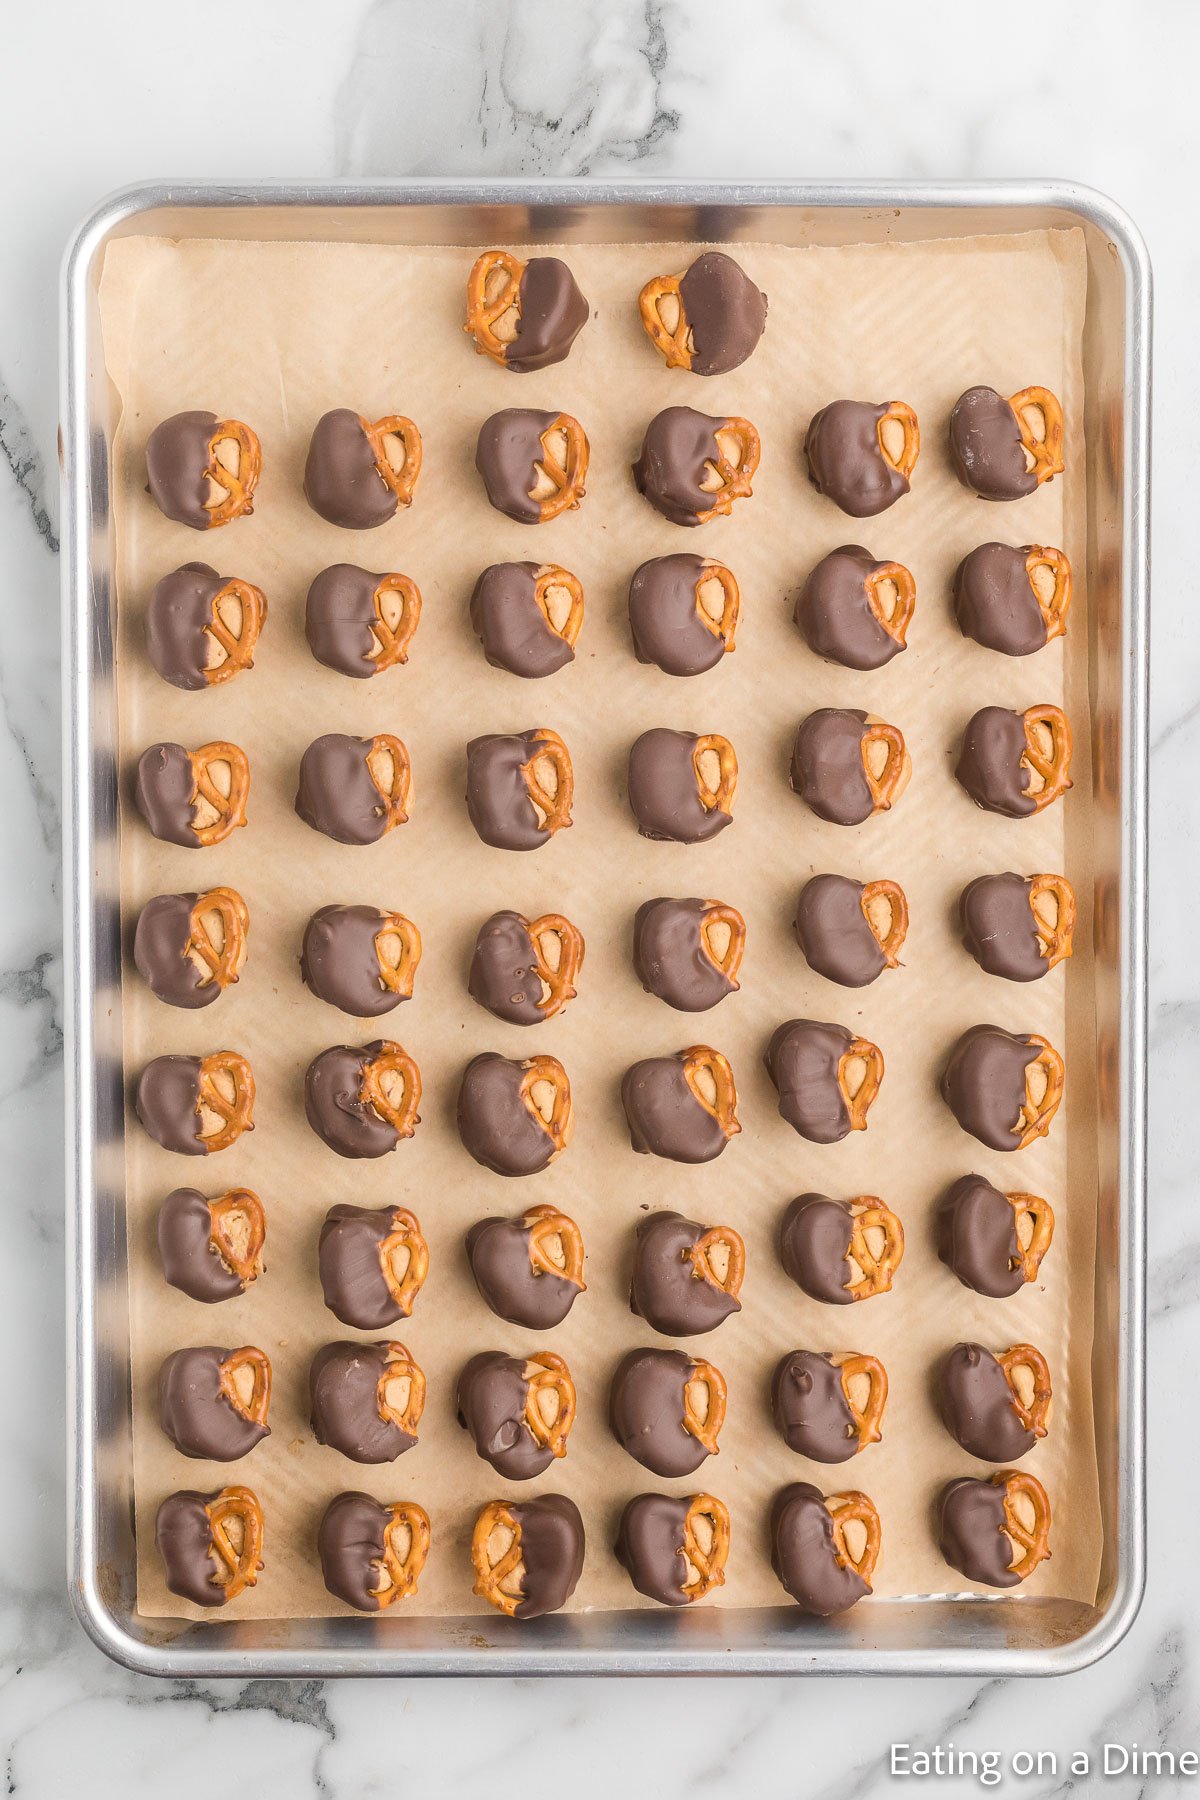 Placing the peanut butter chocolate dipped bites on a baking sheet